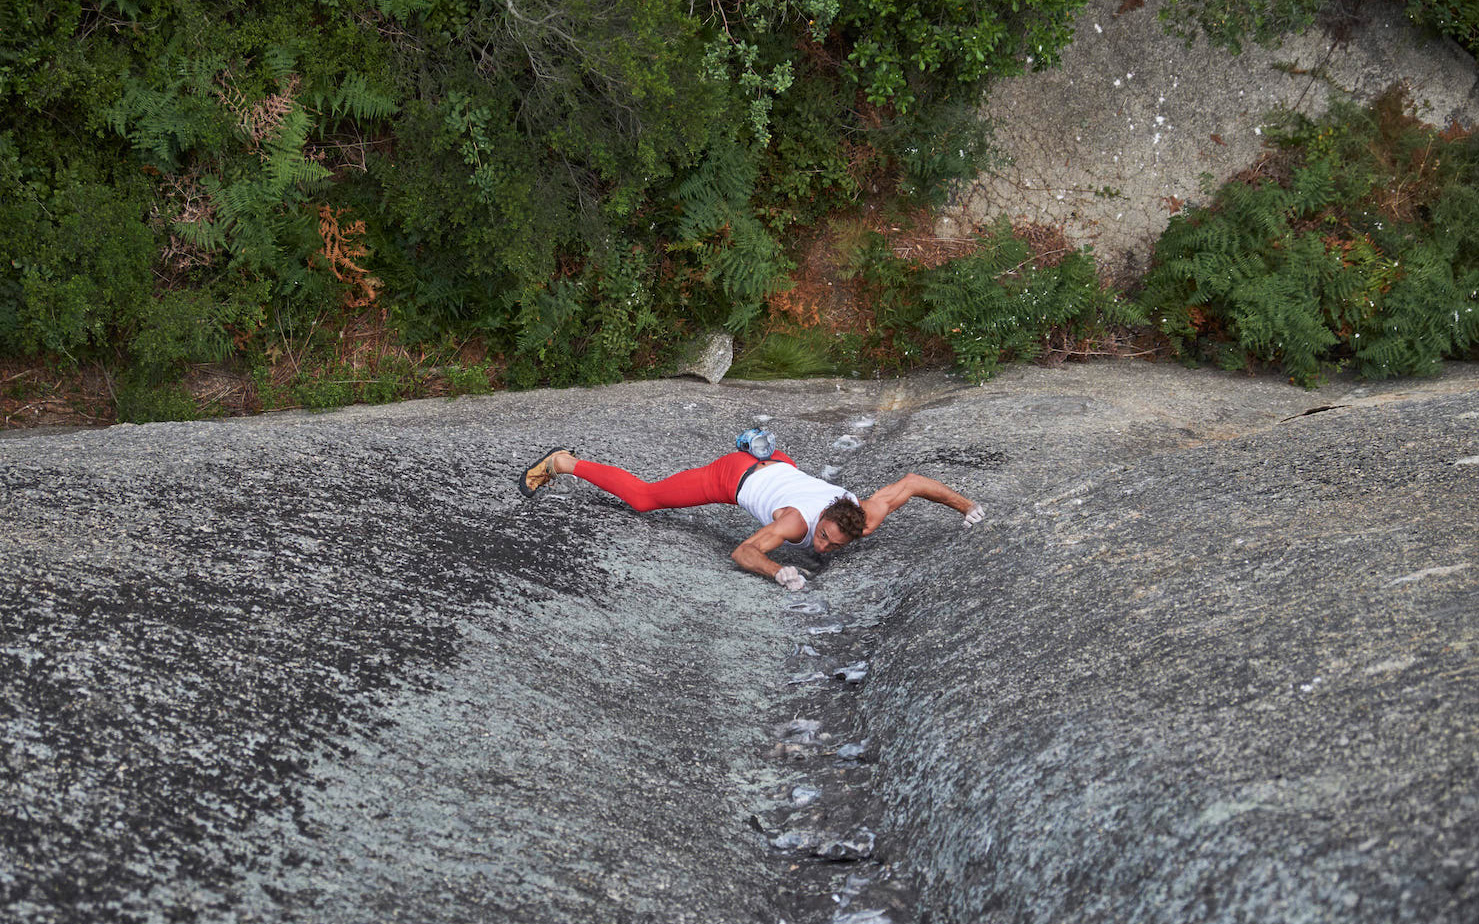 Casualties of War (5.11b/6c). Free soloing ‘Casualties of War’ on Paarl Mountain. RSA. Photo: Jacques Van Zyl.